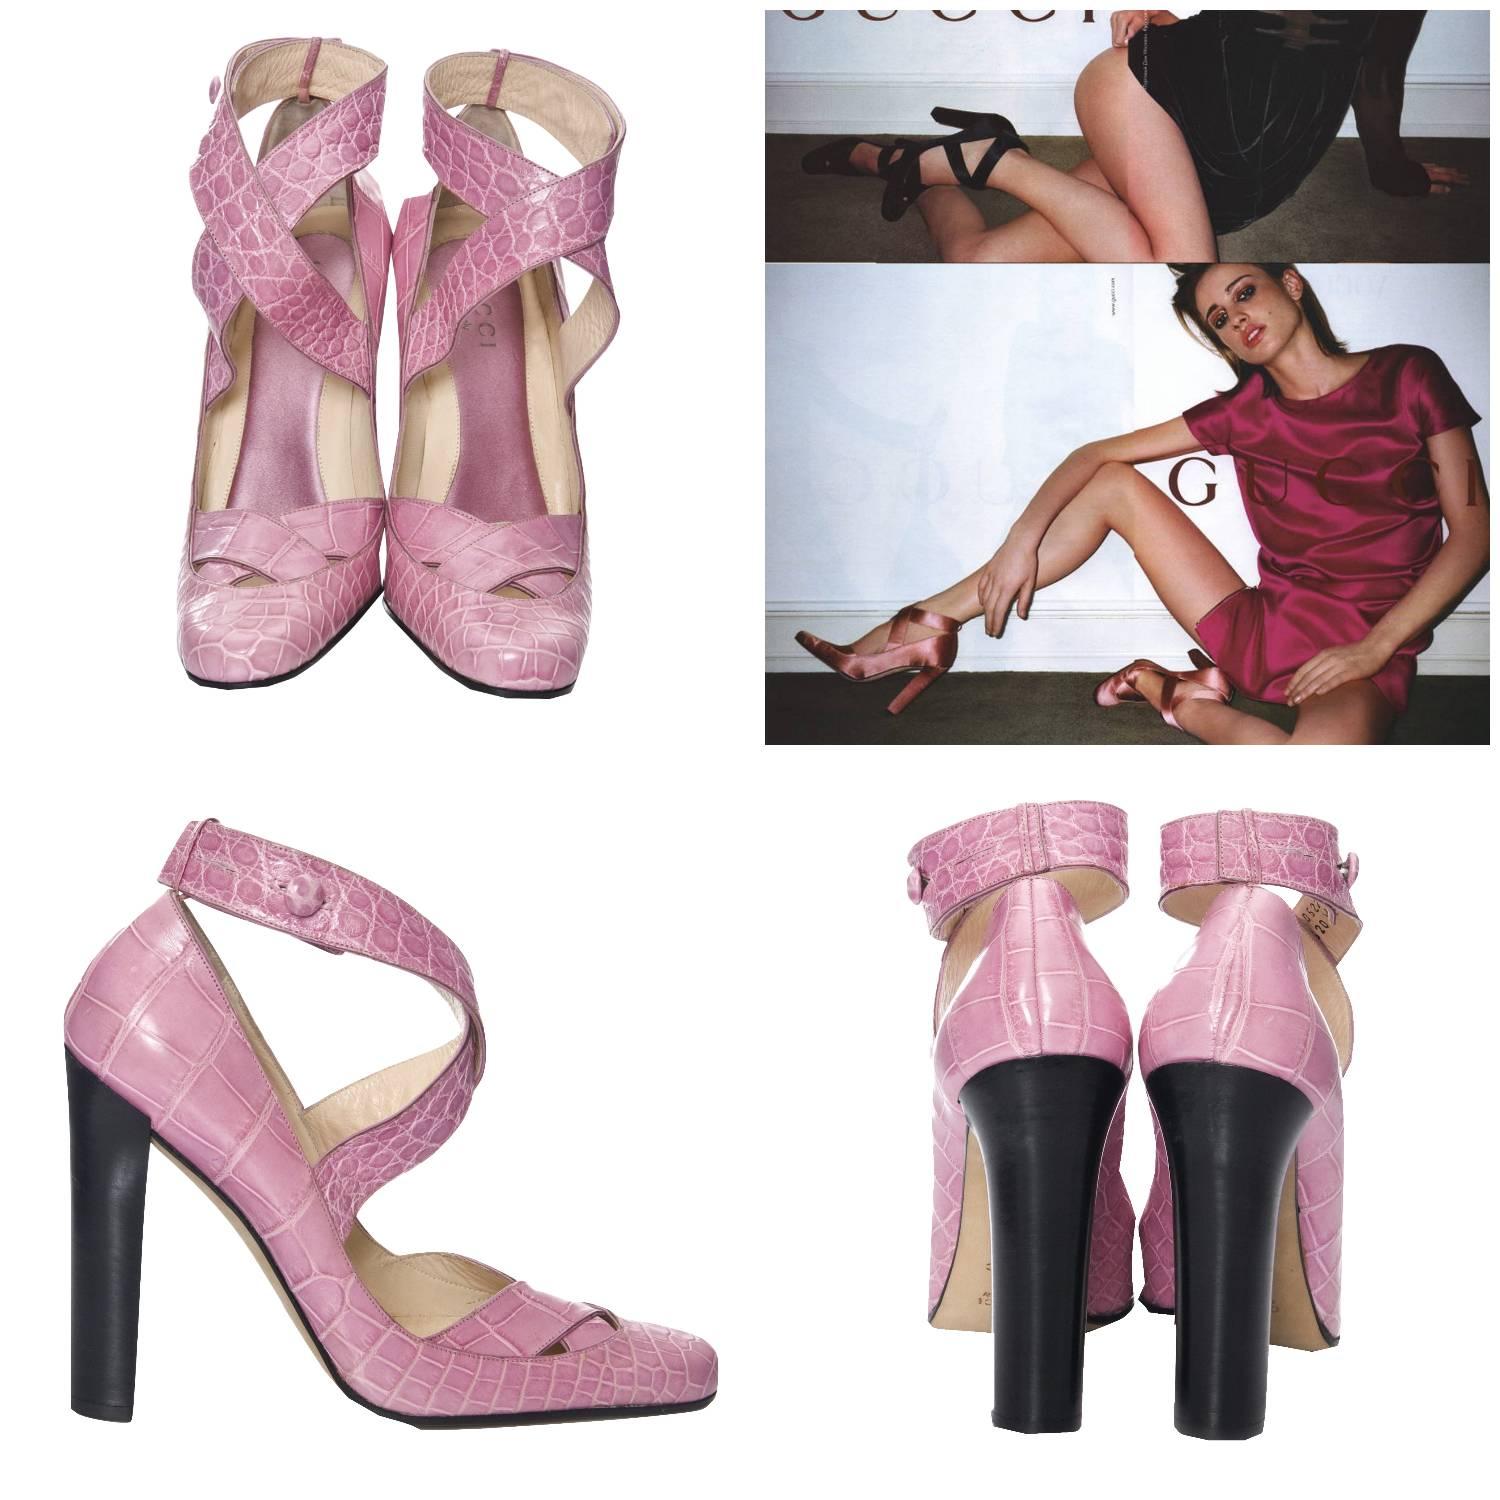 Tom Ford For Gucci Heels
Own a Piece of Fashion History
Brand New, Rare Collectible Ad Runway Heels
* Stunning in Pink Genuine Crocodile
* Tom Ford's Iconic Runway Heels
* Euro Size: 39 
* Adjustable Crocodile Ankle Strap
* Leather & Pink Satin